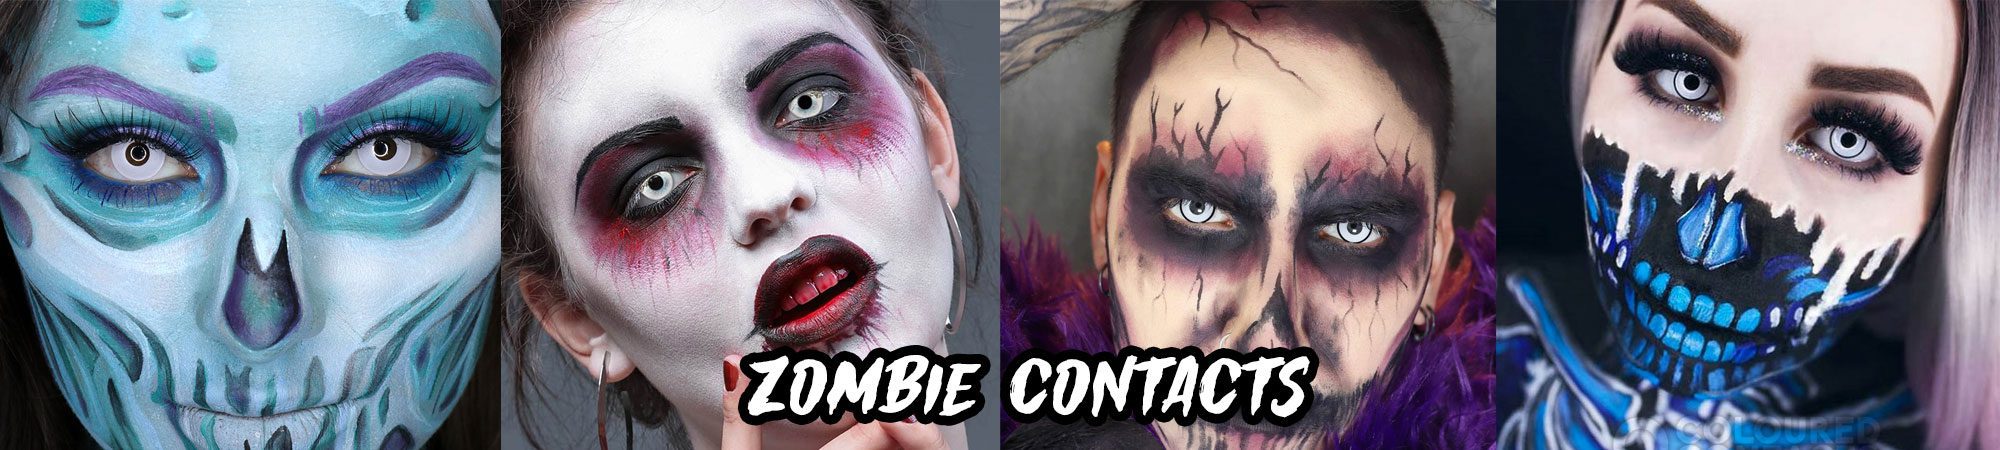 Zombie Contacts